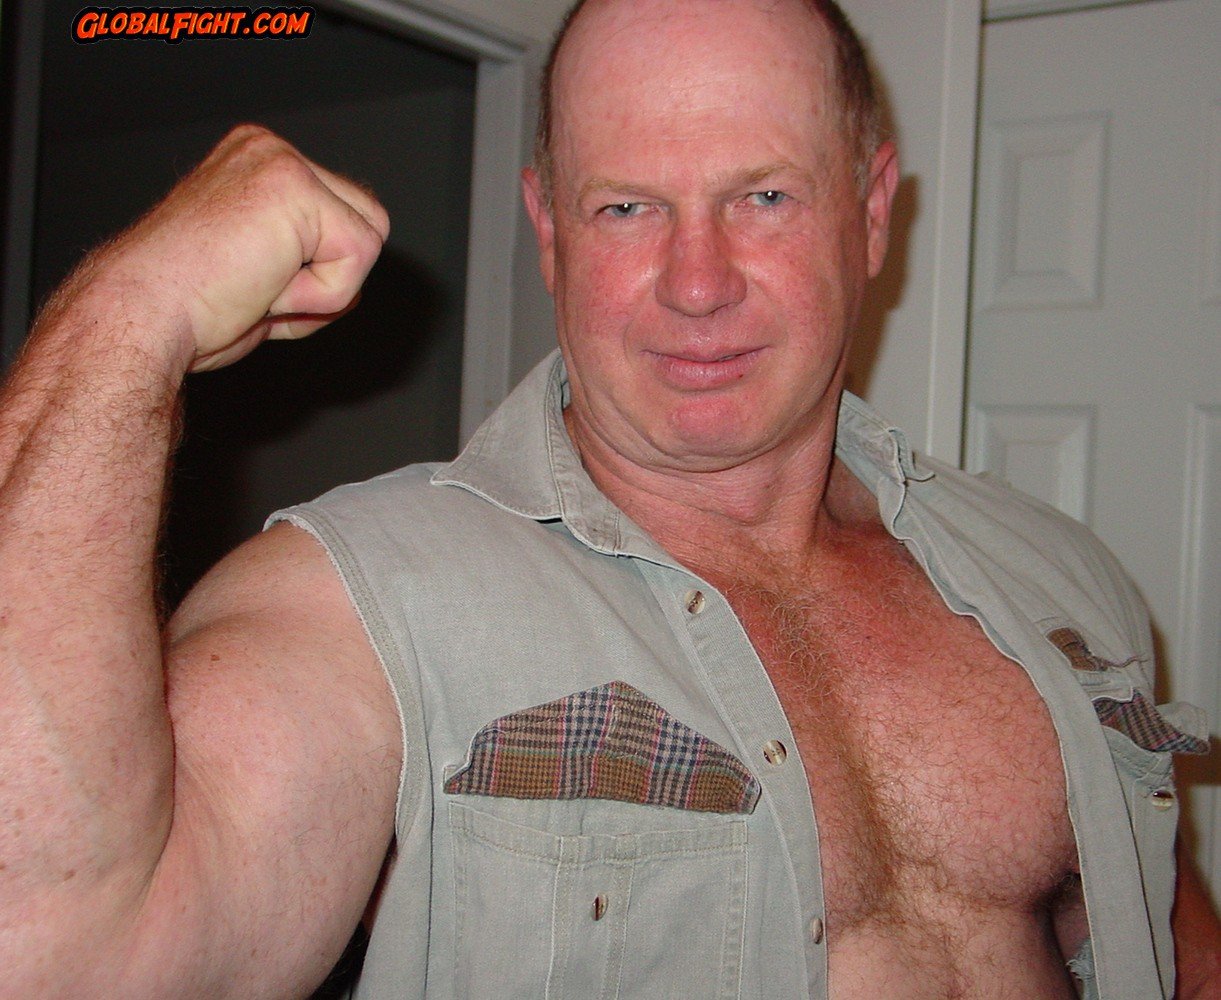 Photo by Hairy Musclebears with the username @hairymusclebears,  April 10, 2020 at 2:31 AM. The post is about the topic Musclebear Daddy and the text says 'Redneck Gay Silverdaddy from GLOBALFIGHT profiles #gay #redneck #silverdaddy #silverfox #grandaddy #hairychest'